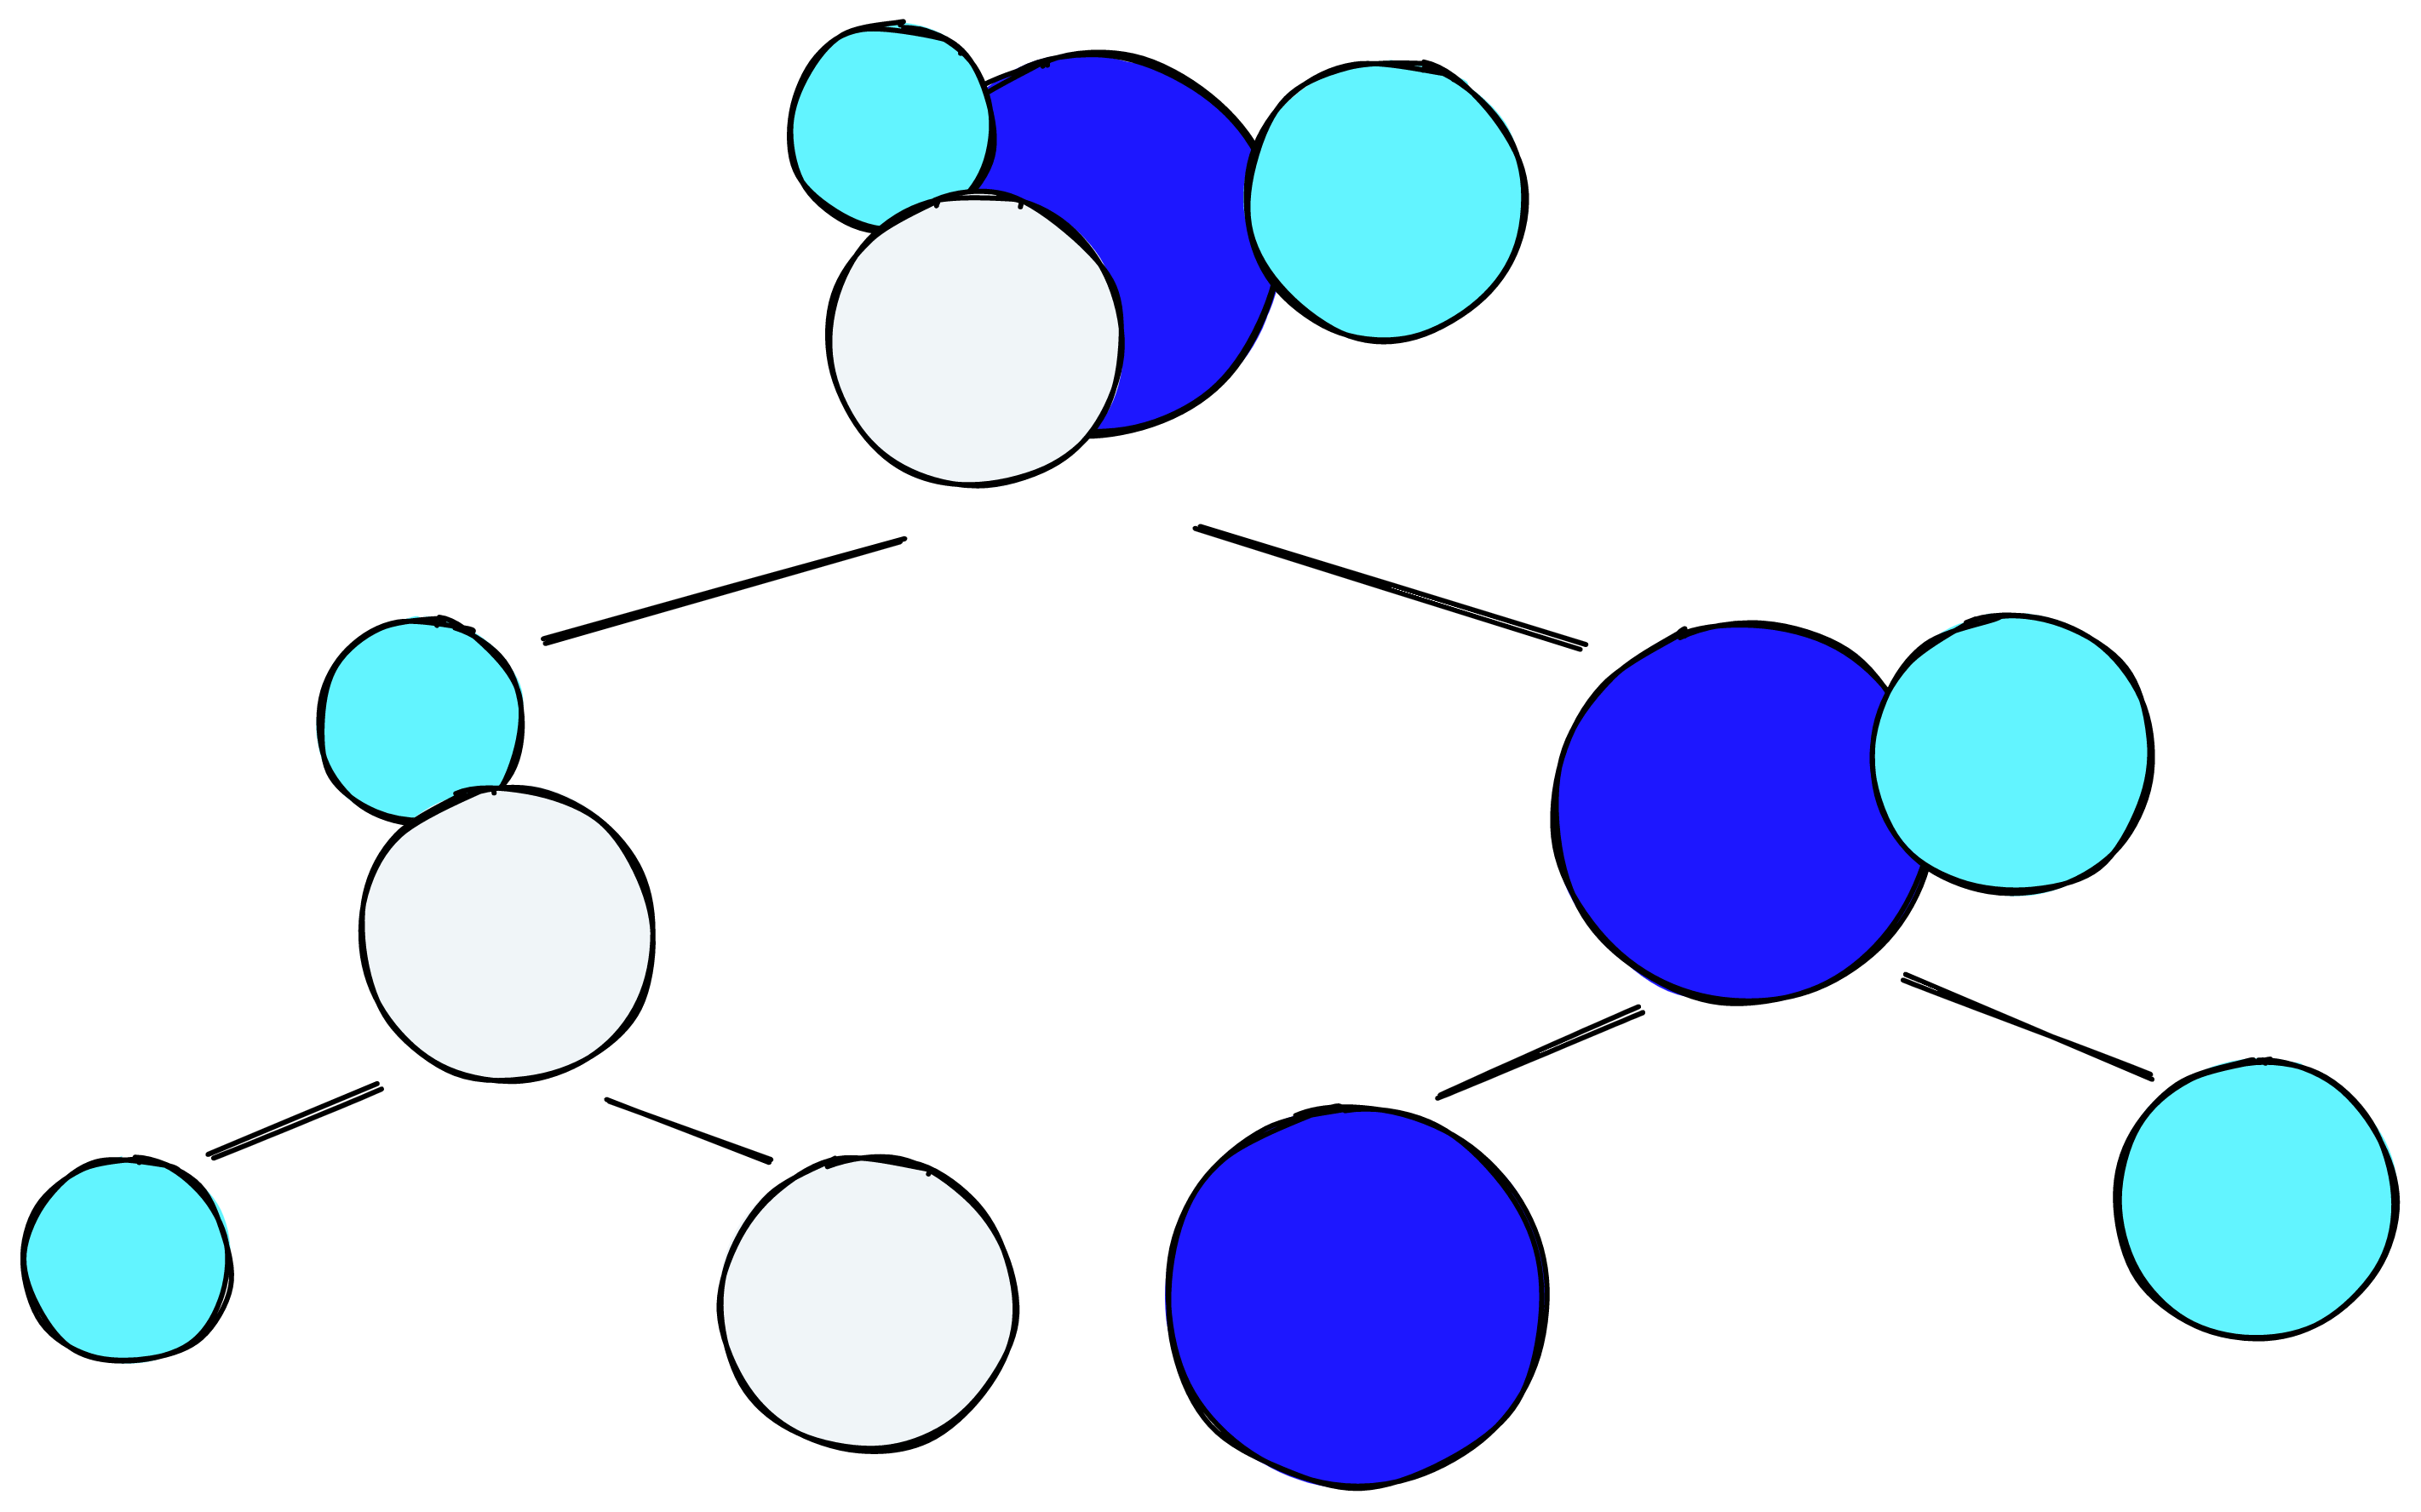 Hierarchical techniques begin from one large cluster and split this cluster into smaller and smaller parts and try to find the ideal number of clusters in the hierarchy.